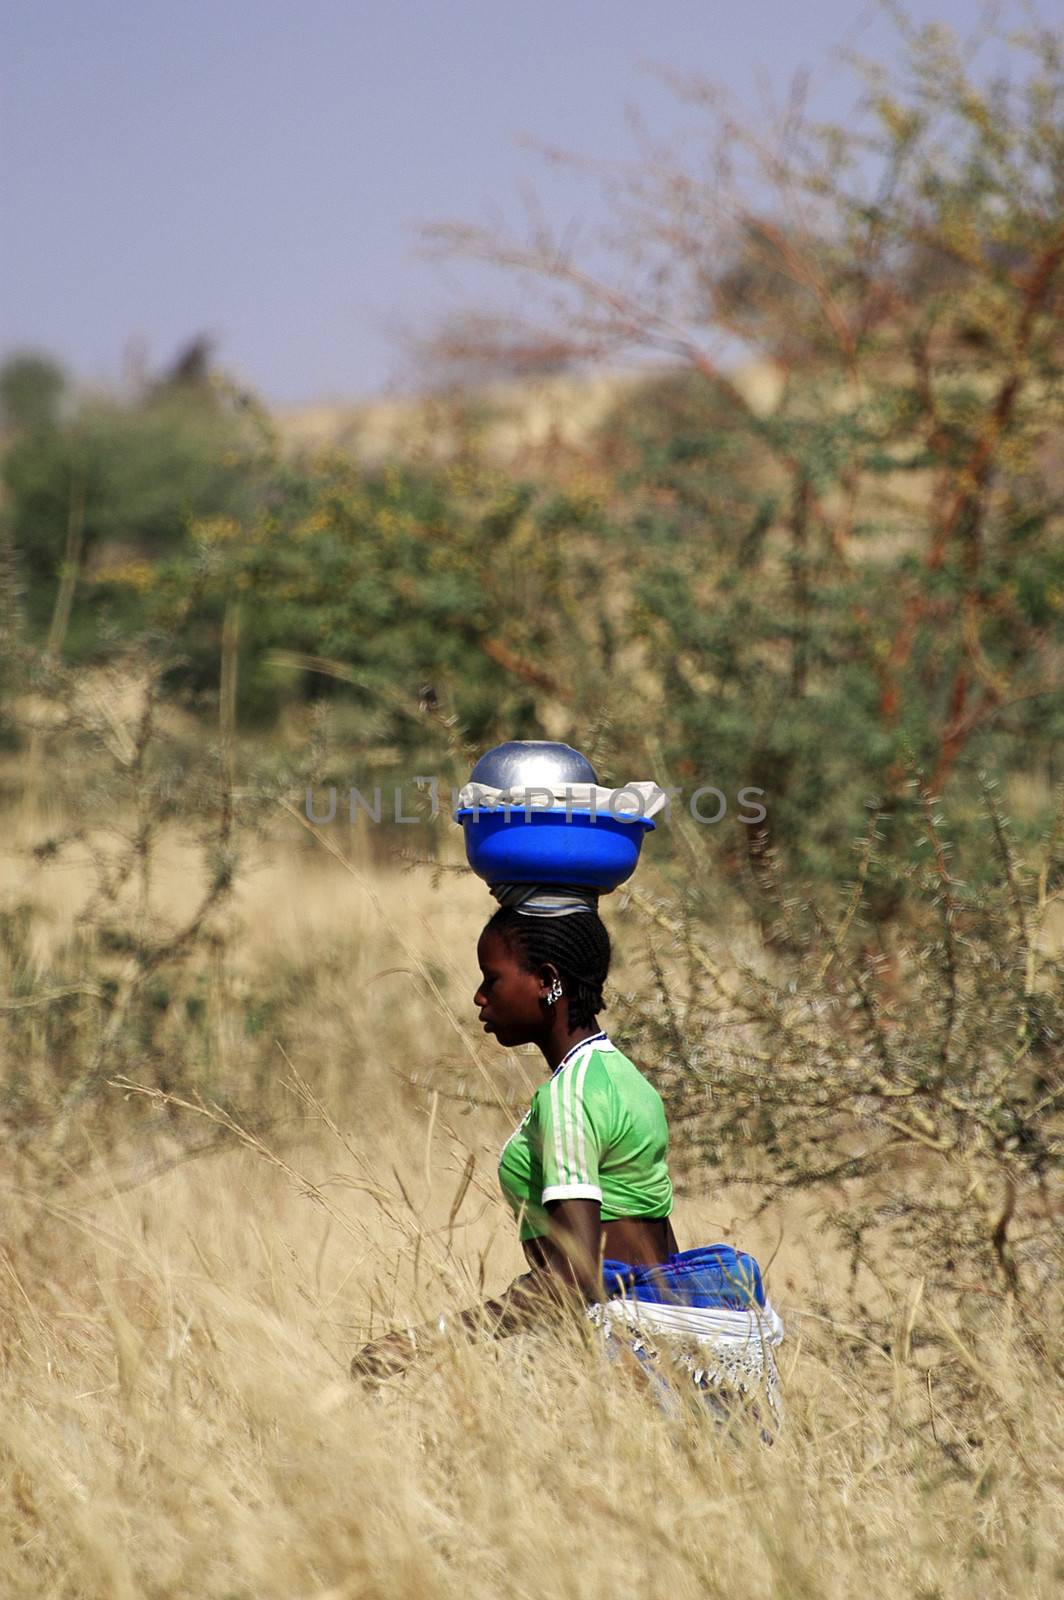 the African women carrying heavy loads sometimes on their heads over long distances through the bush